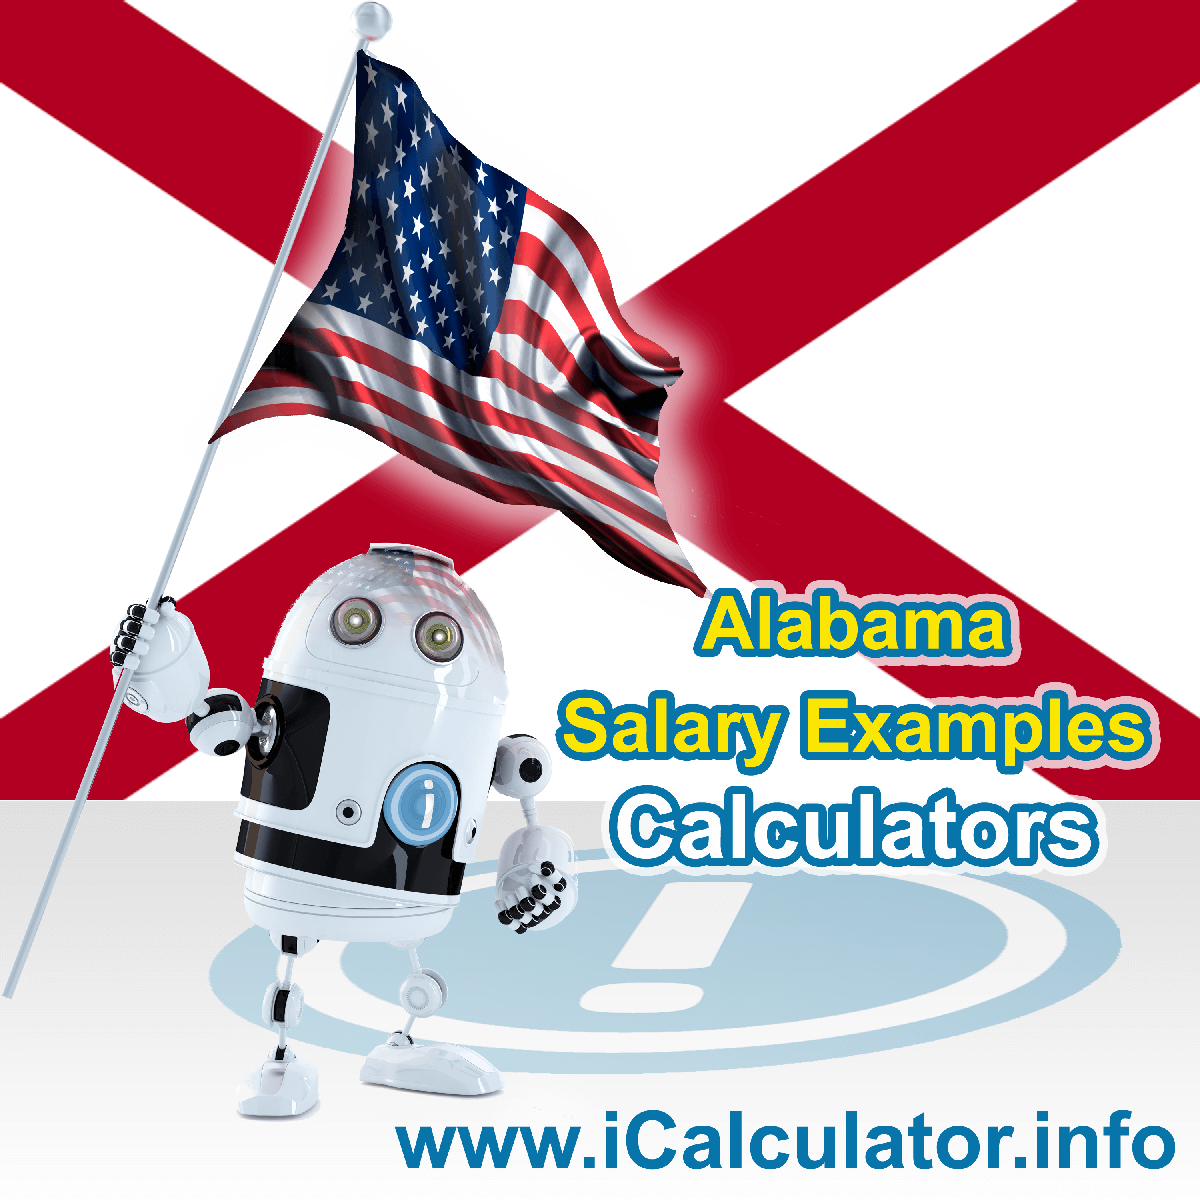 Alabama Salary Example for $ 240,000.00 in 2023 | iCalculator™ | $ 240,000.00 salary example for employee and employer paying Alabama State tincome taxes. Detailed salary after tax calculation including Alabama State Tax, Federal State Tax, Medicare Deductions, Social Security, Capital Gains and other income tax and salary deductions complete with supporting Alabama state tax tables 